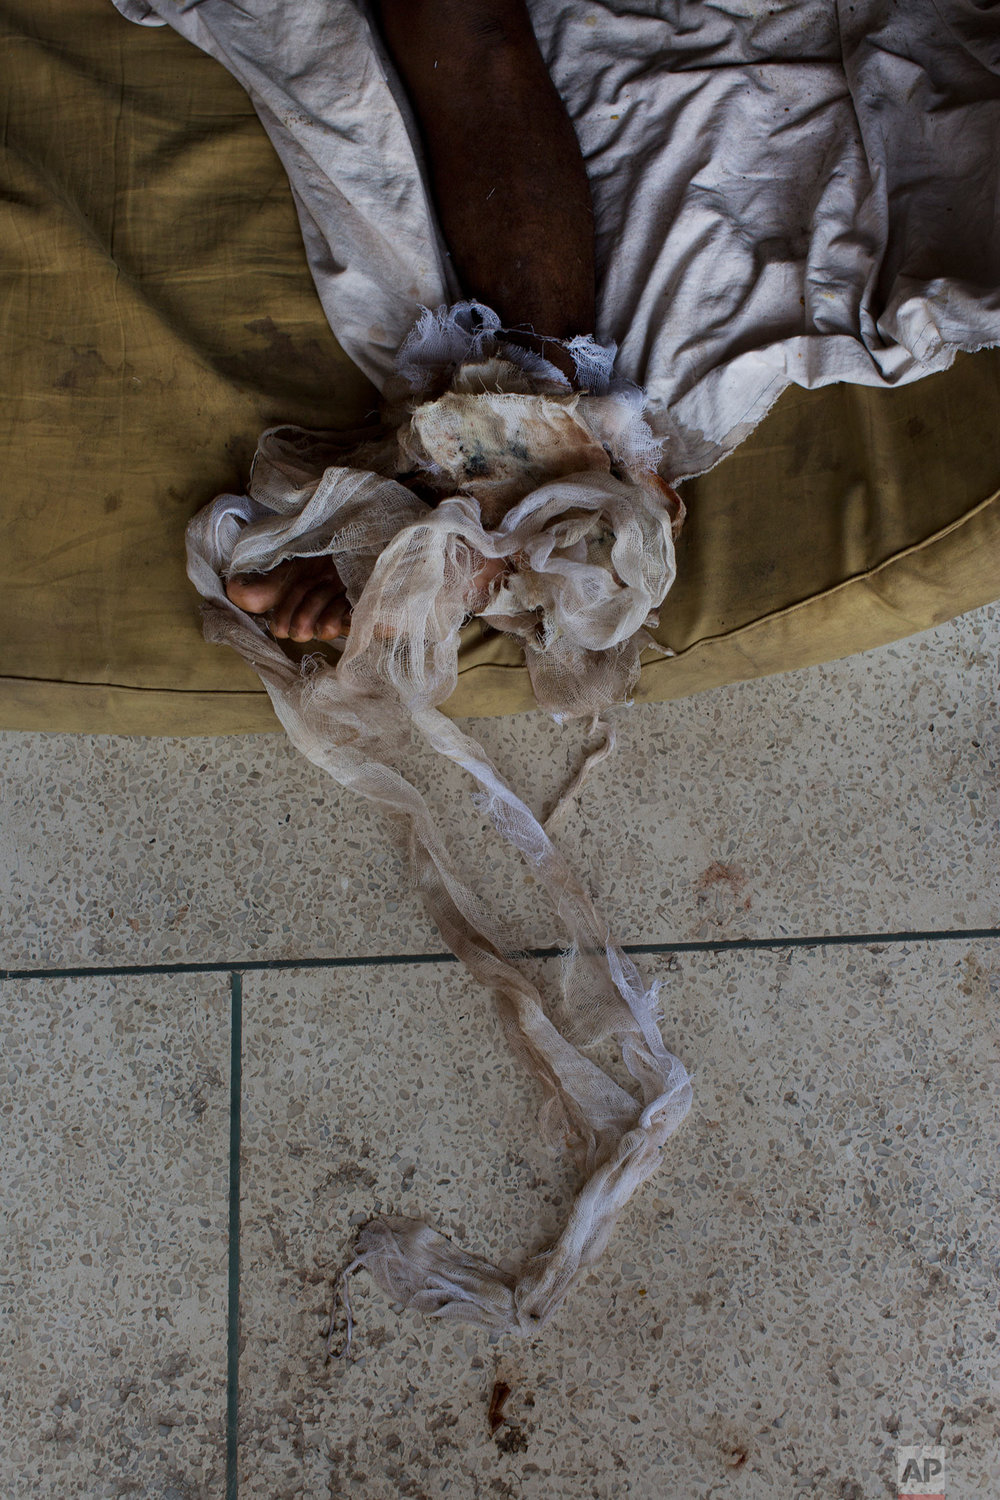  EDS NOTE GRAPHIC CONTENT - Rohingya men Abdul Karim lies on the floor at Sadar Hospital in Cox's Bazar, Bangladesh, Sunday, Sept. 10, 2017. Karim sustained severely bullet injuries on his left foot and chest when Myanmar monks and soldiers attacked 